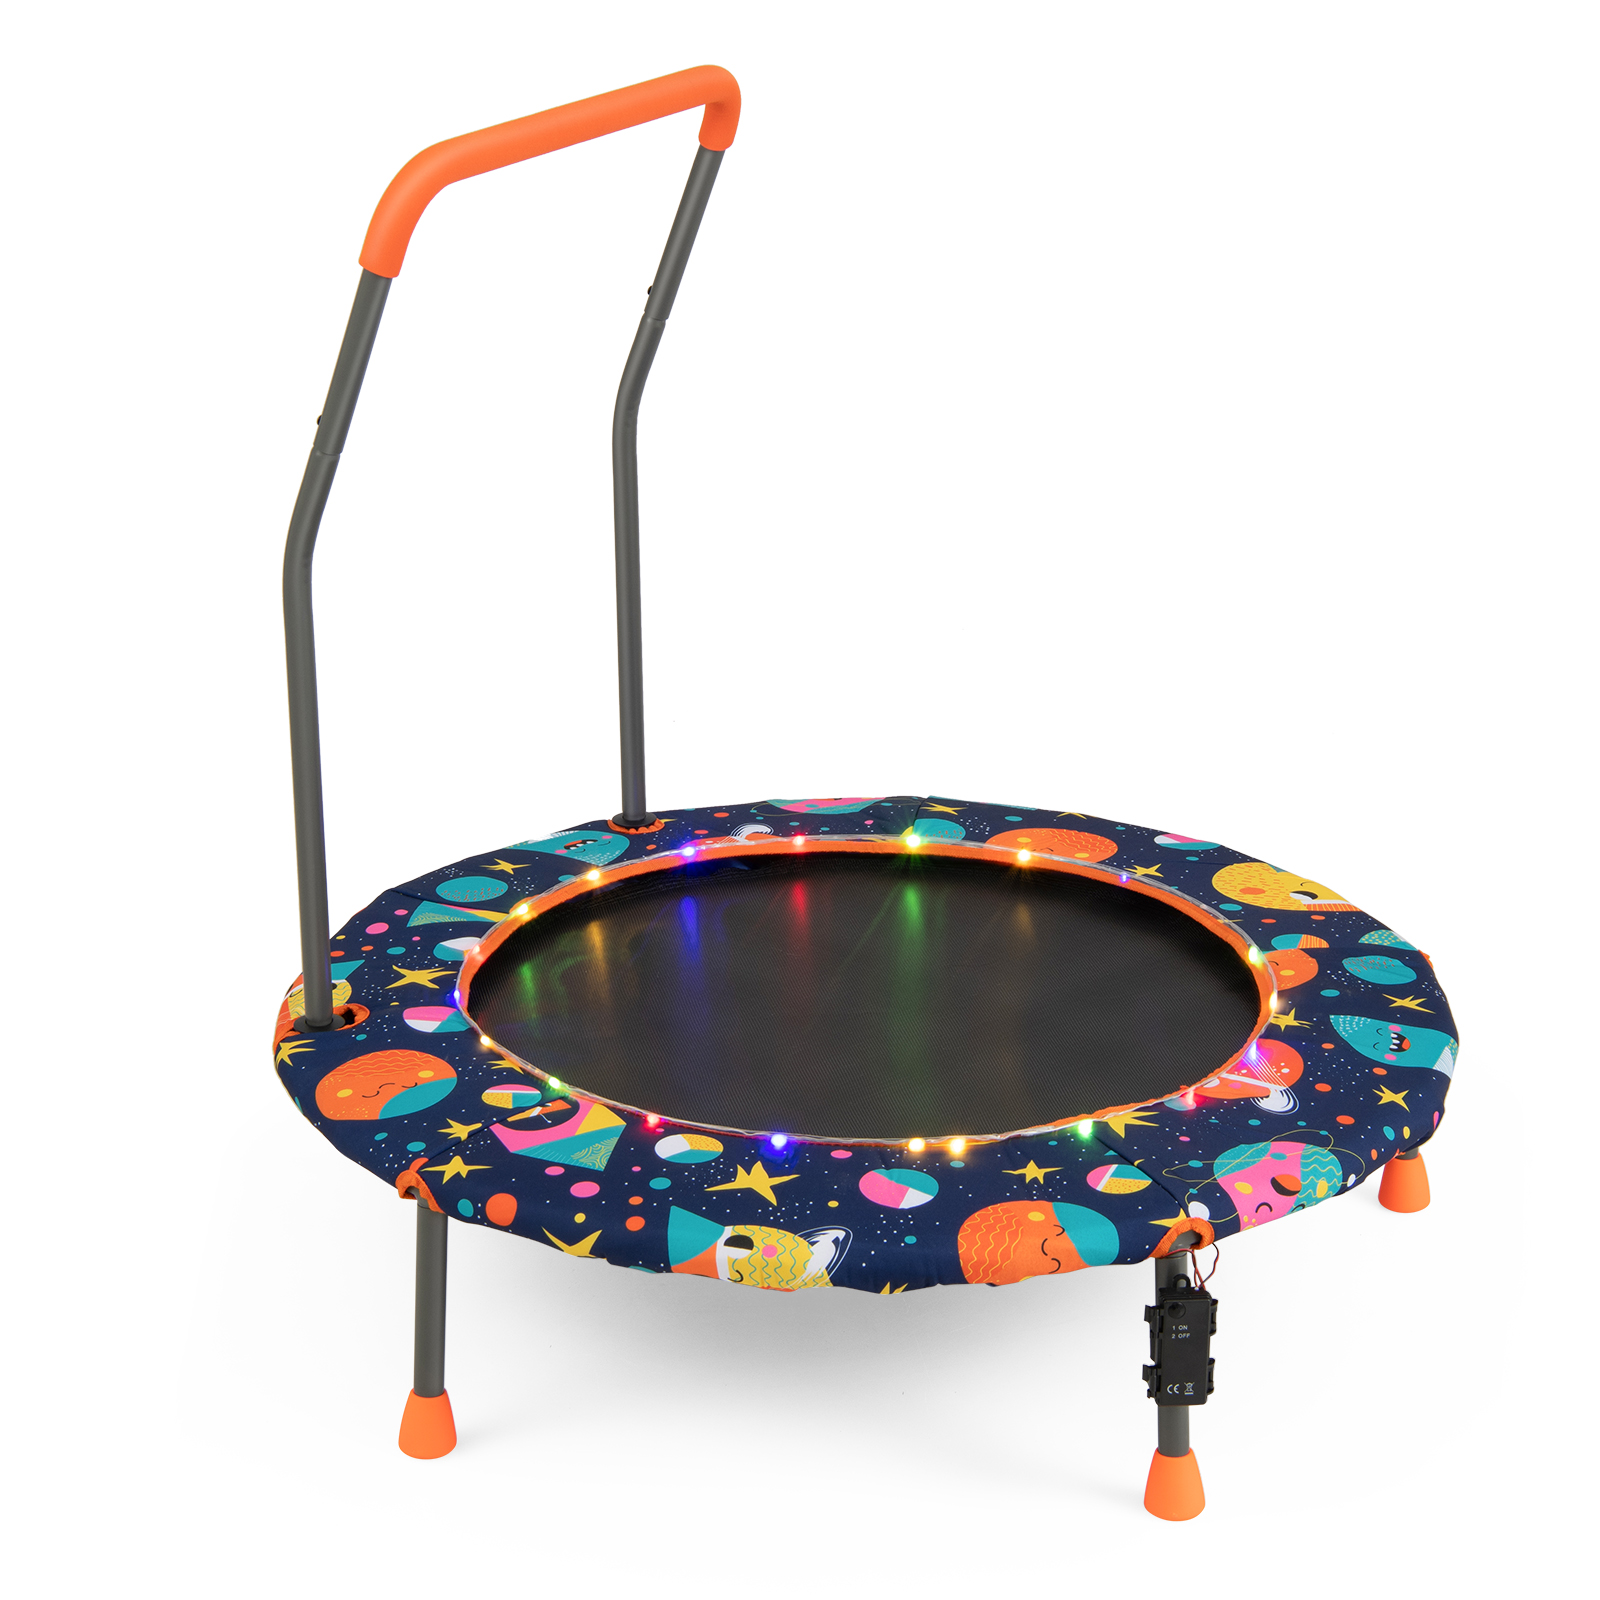 Mini Trampoline for Children with LED Lights and Padded Safety Handle-Multicolor